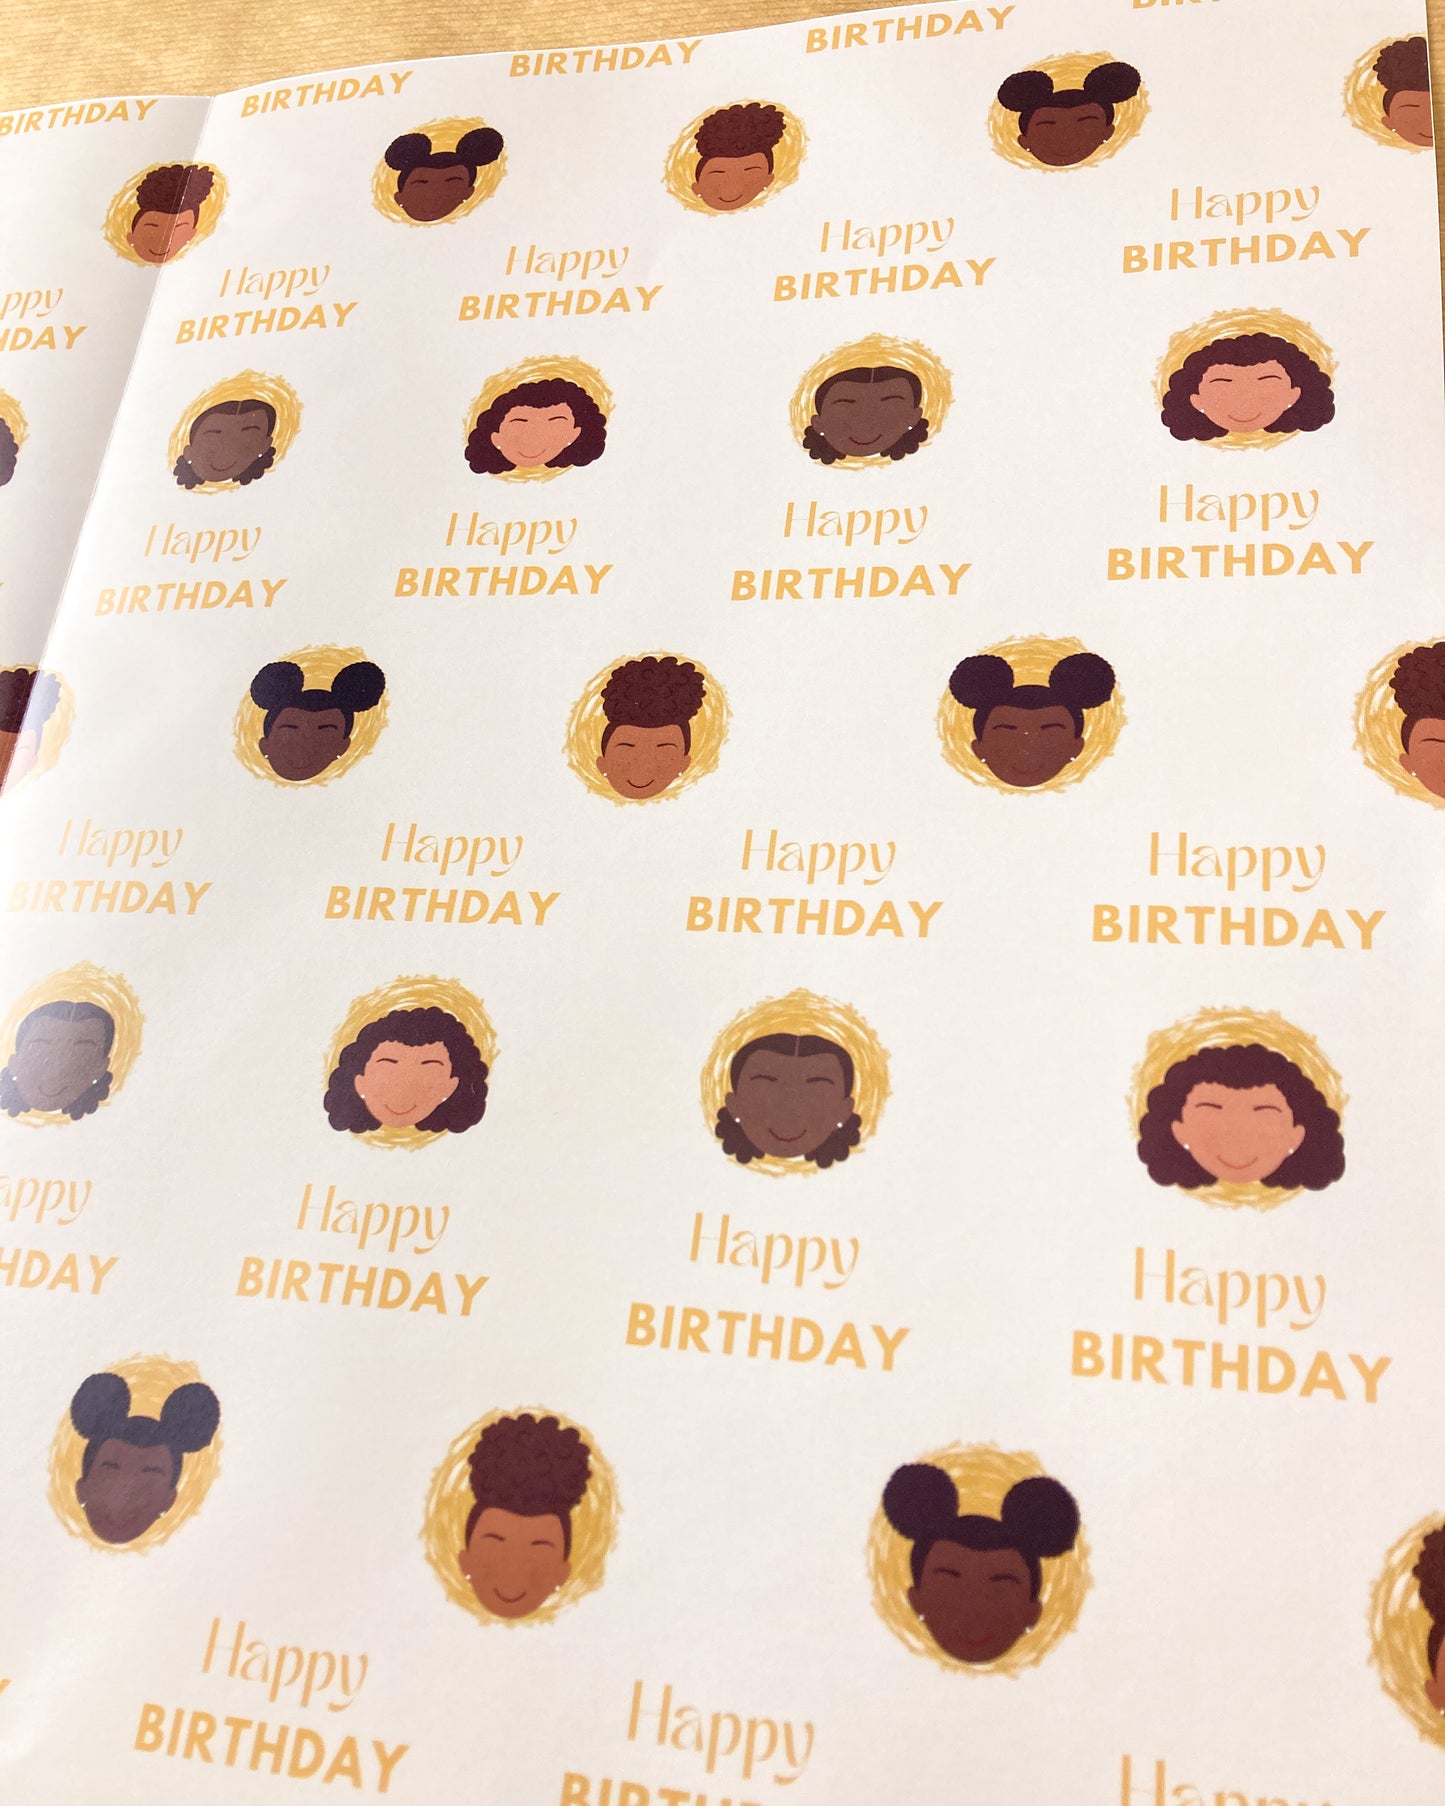 Girls Happy Birthday Wrapping Paper - Kids Ethnic Black Mixed Race Children Gift Wrap girl